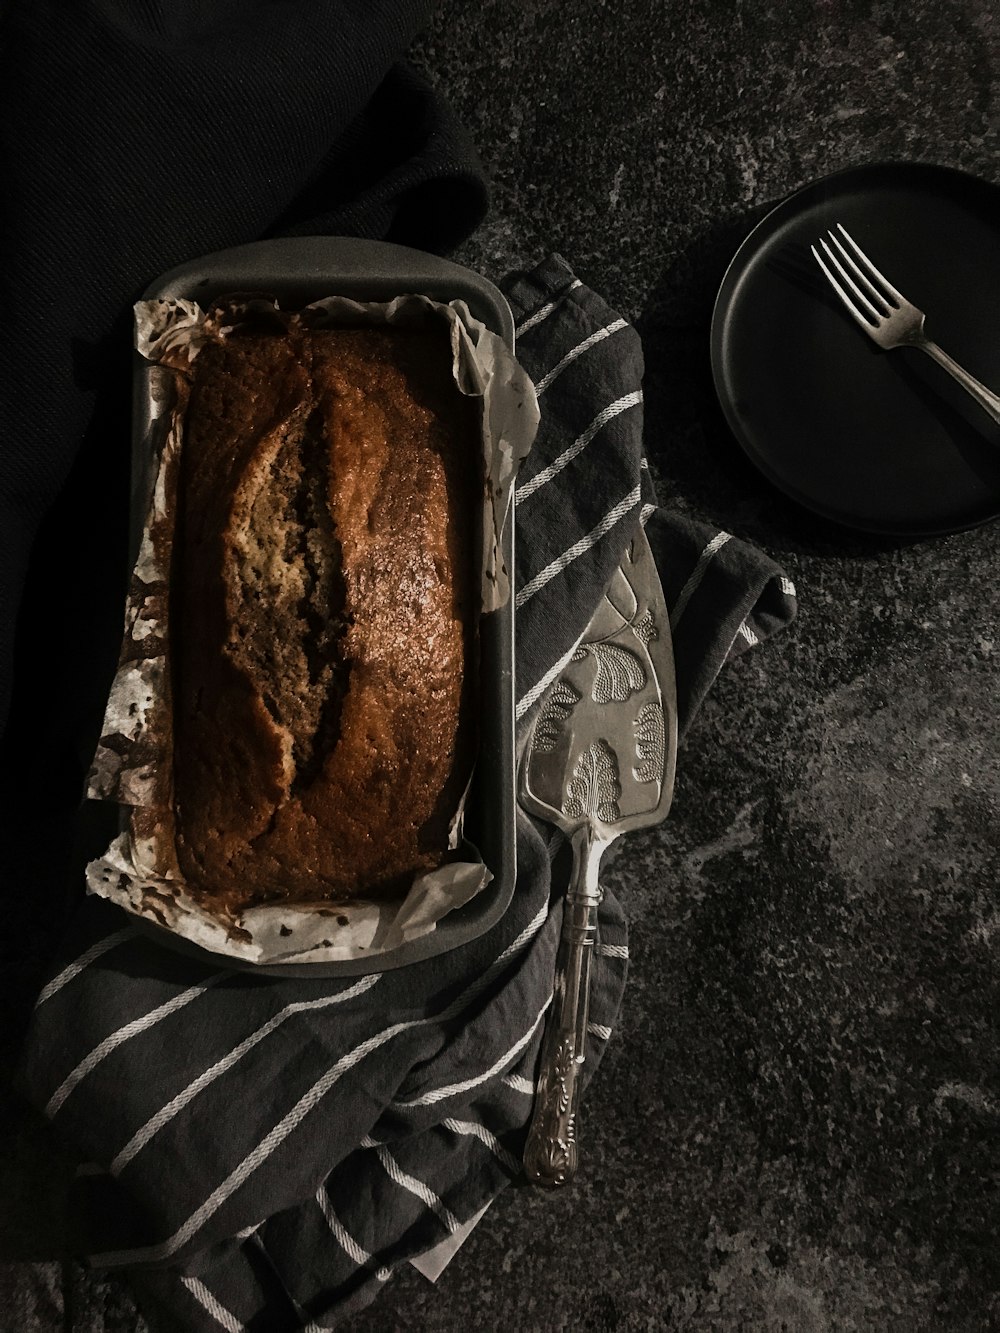 brown bread on stainless steel tray